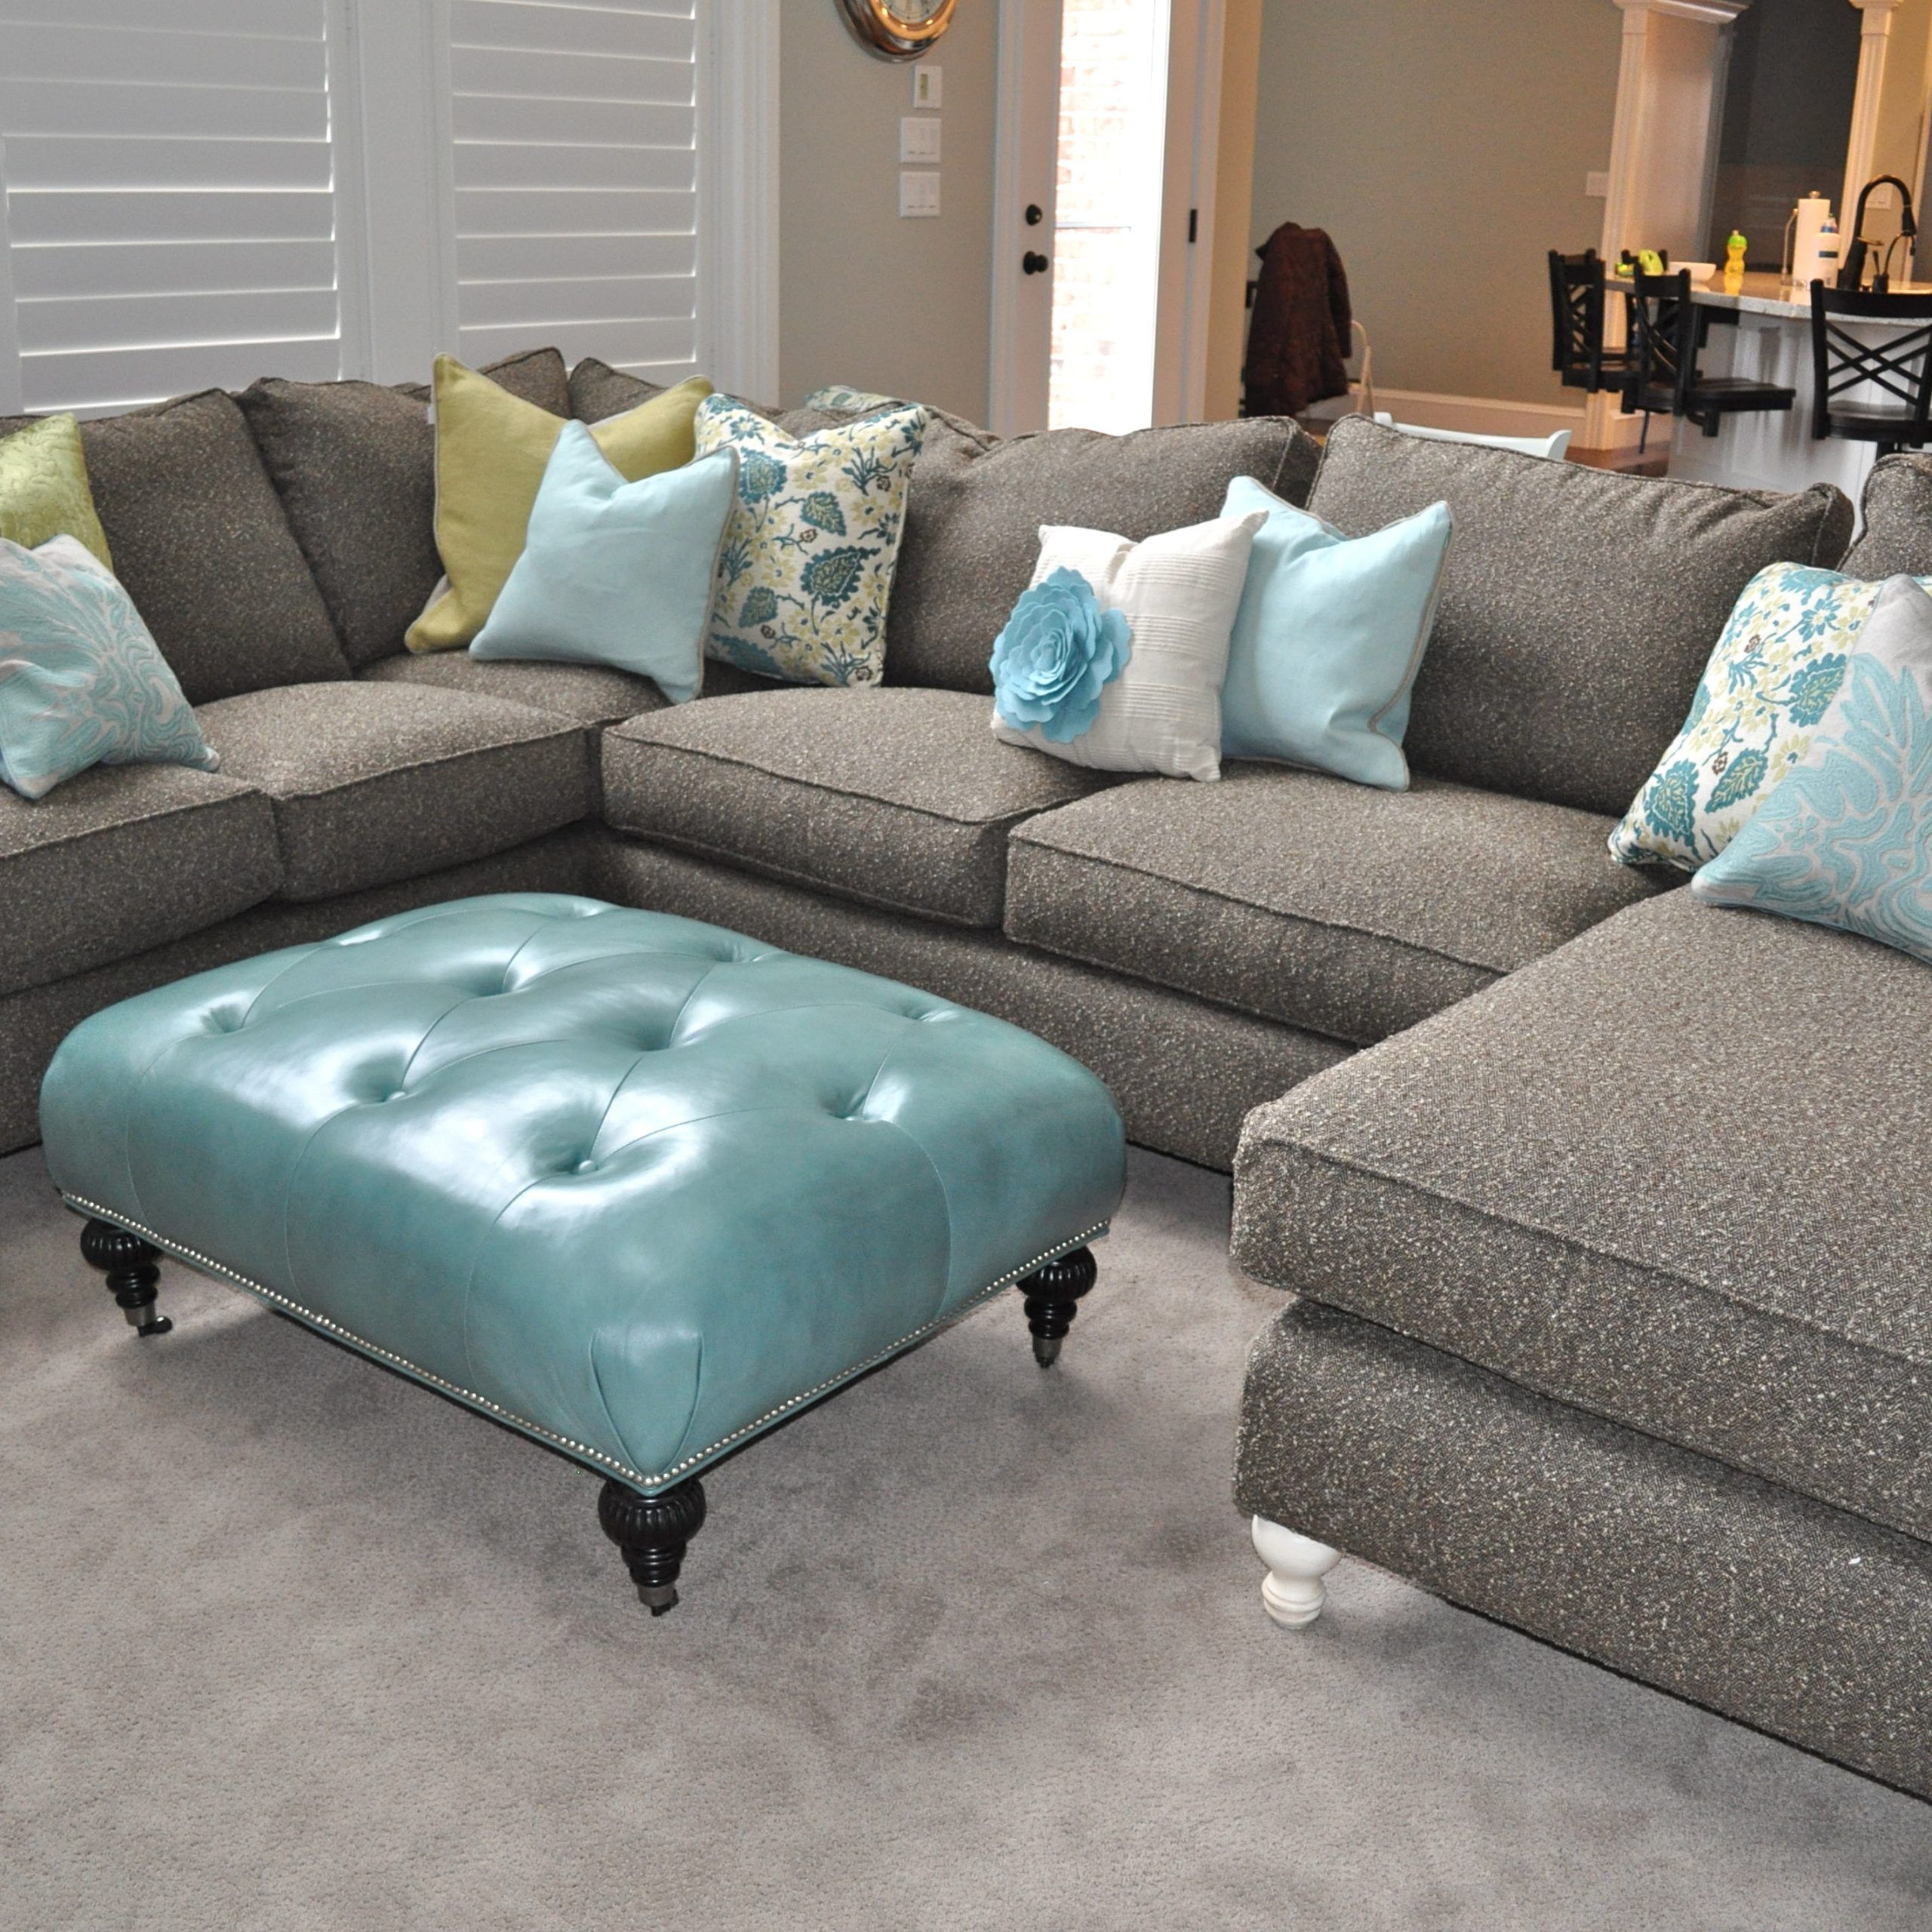 U Shaped Sectional With Chaise Design – Homesfeed Within Modern U Shape Sectional Sofas In Gray (View 7 of 20)